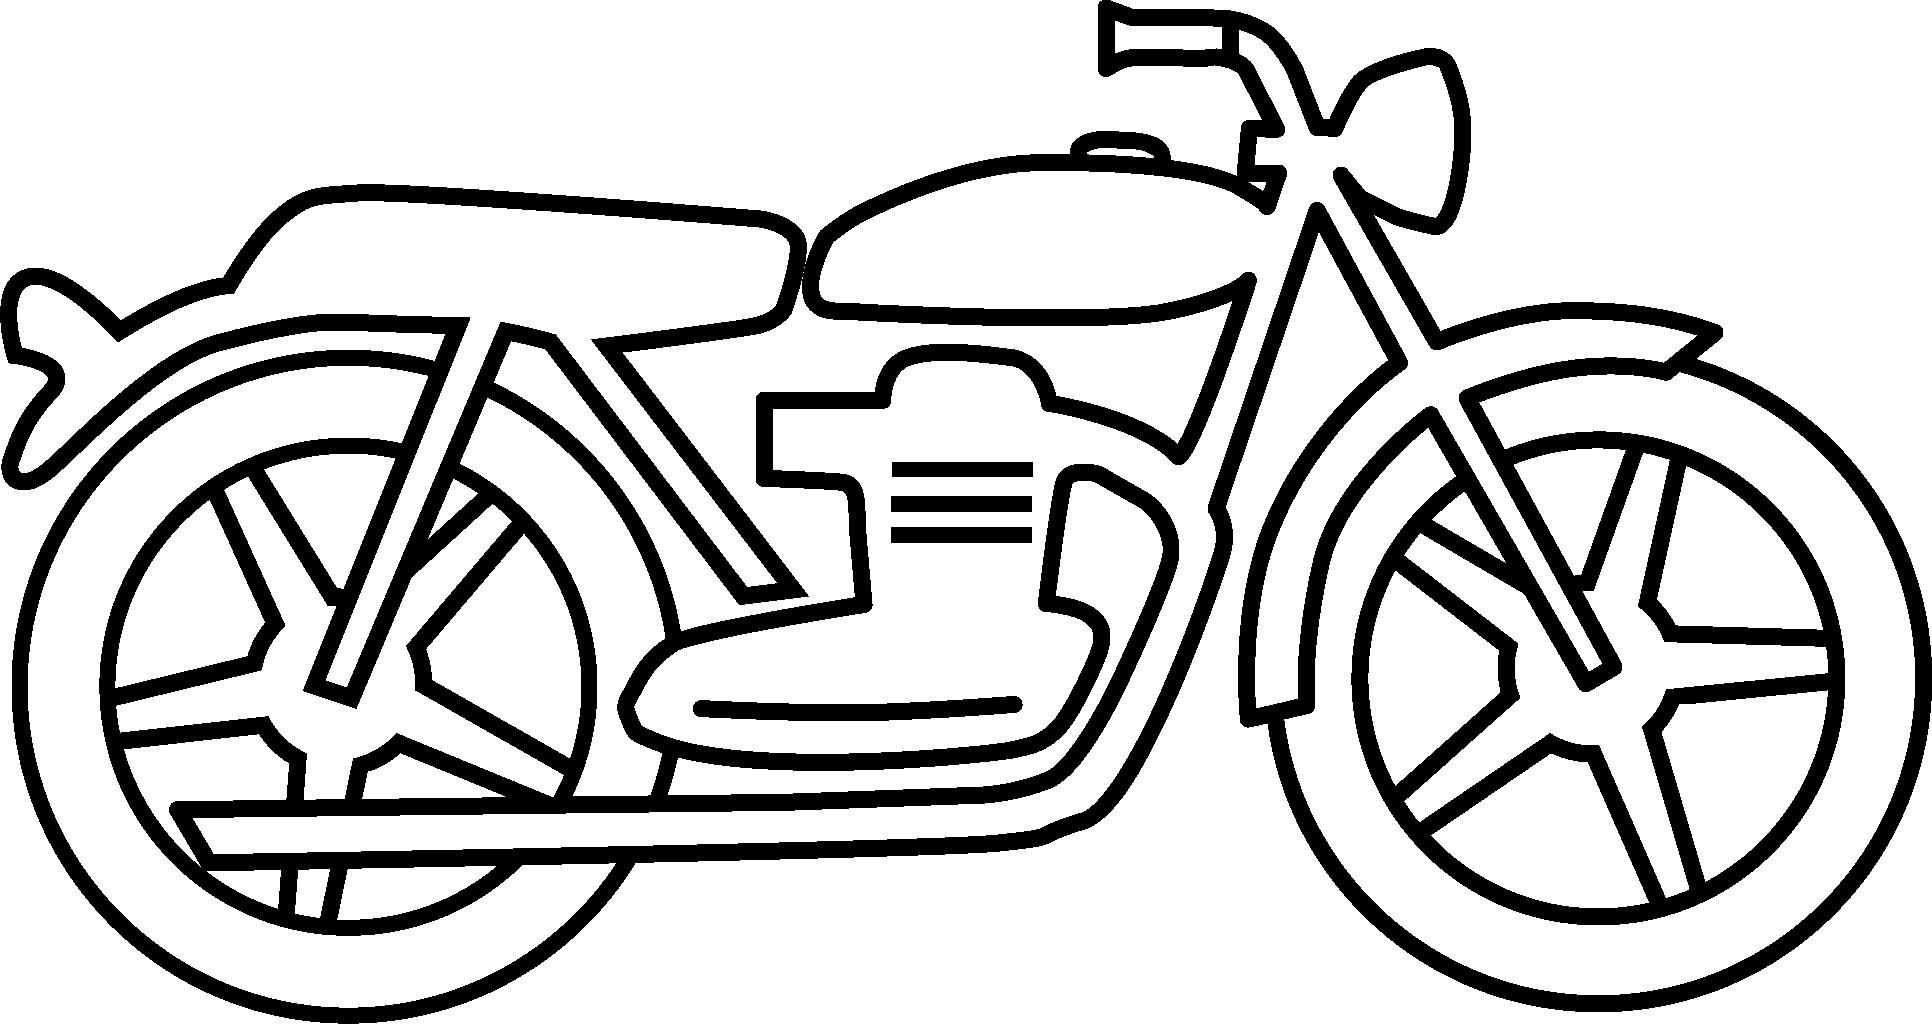 Motorcycle drawings clipart.